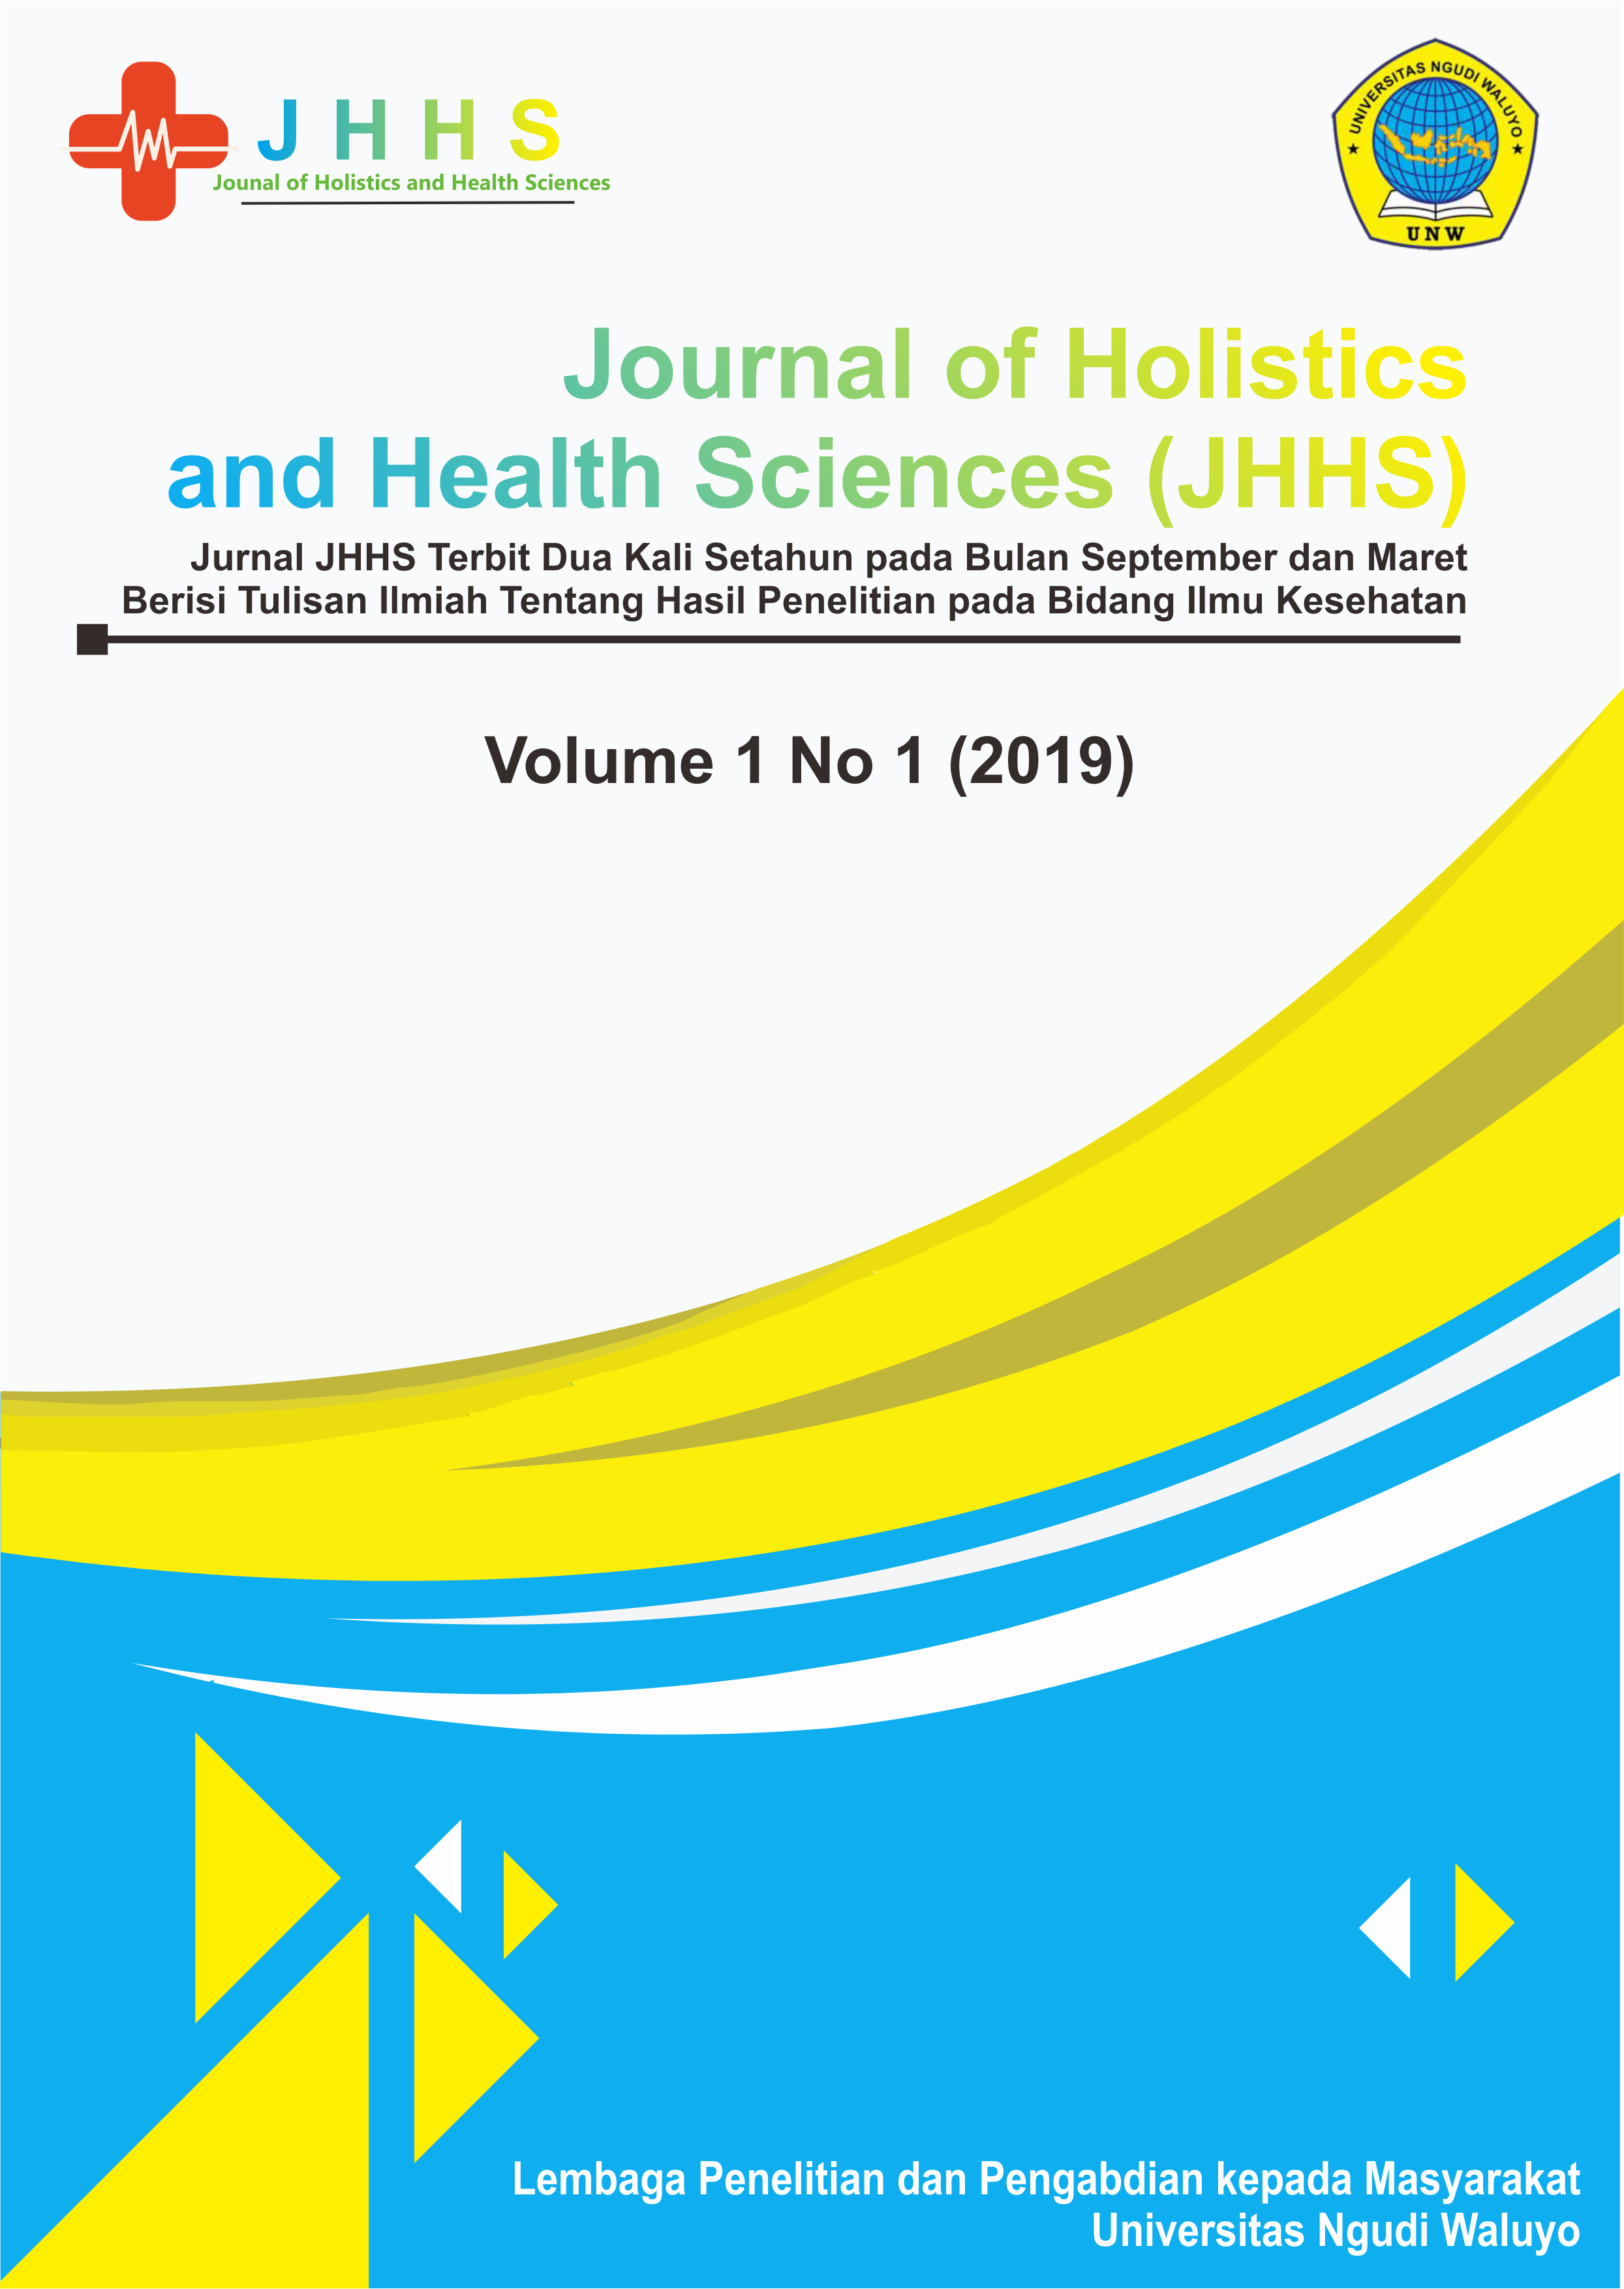 					View Vol. 1 No. 1 (2019): Journal of Holistics and Health Science (JHHS), September
				